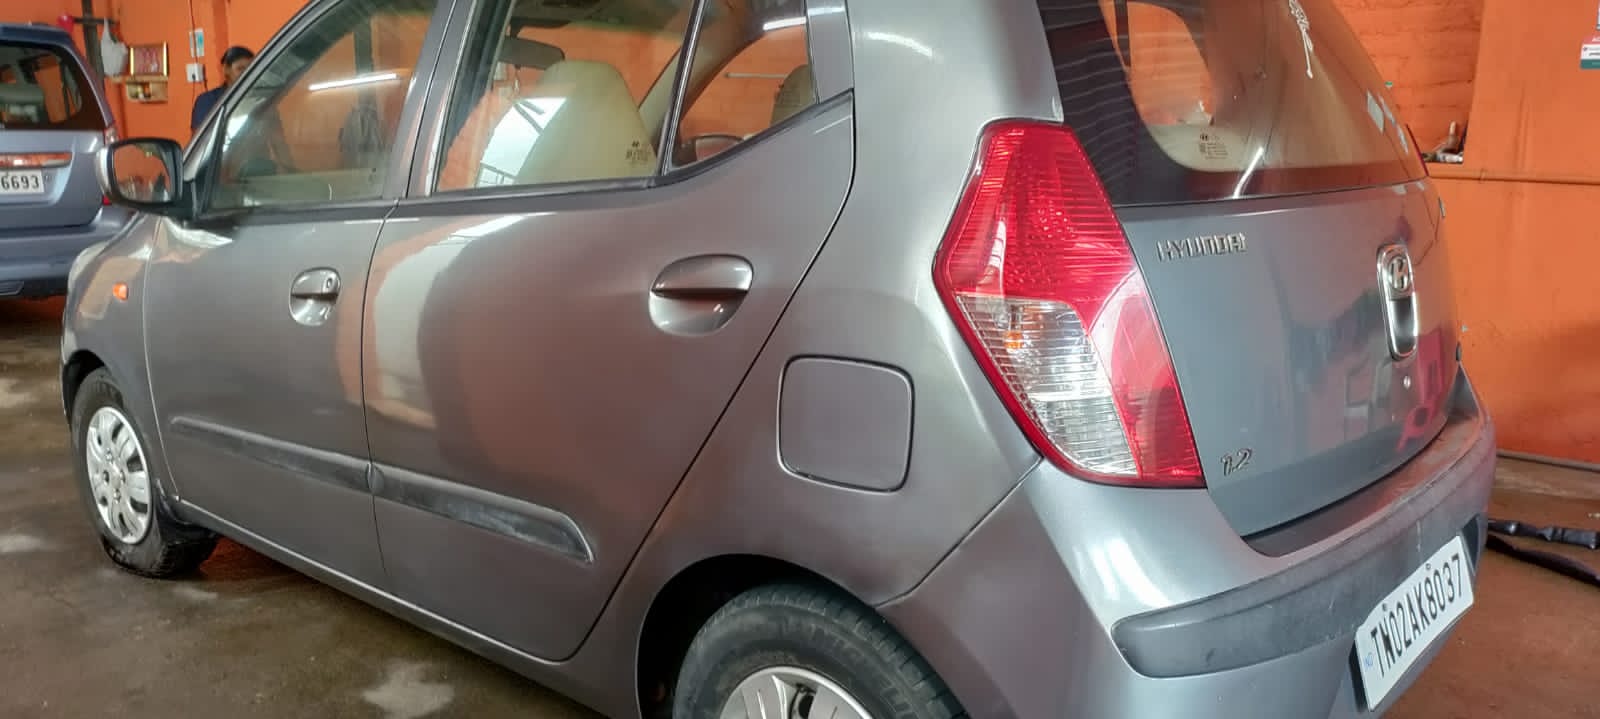 3586-for-sale-Hyundai-i10-Petrol-Second-Owner-2010-TN-registered-rs-210000